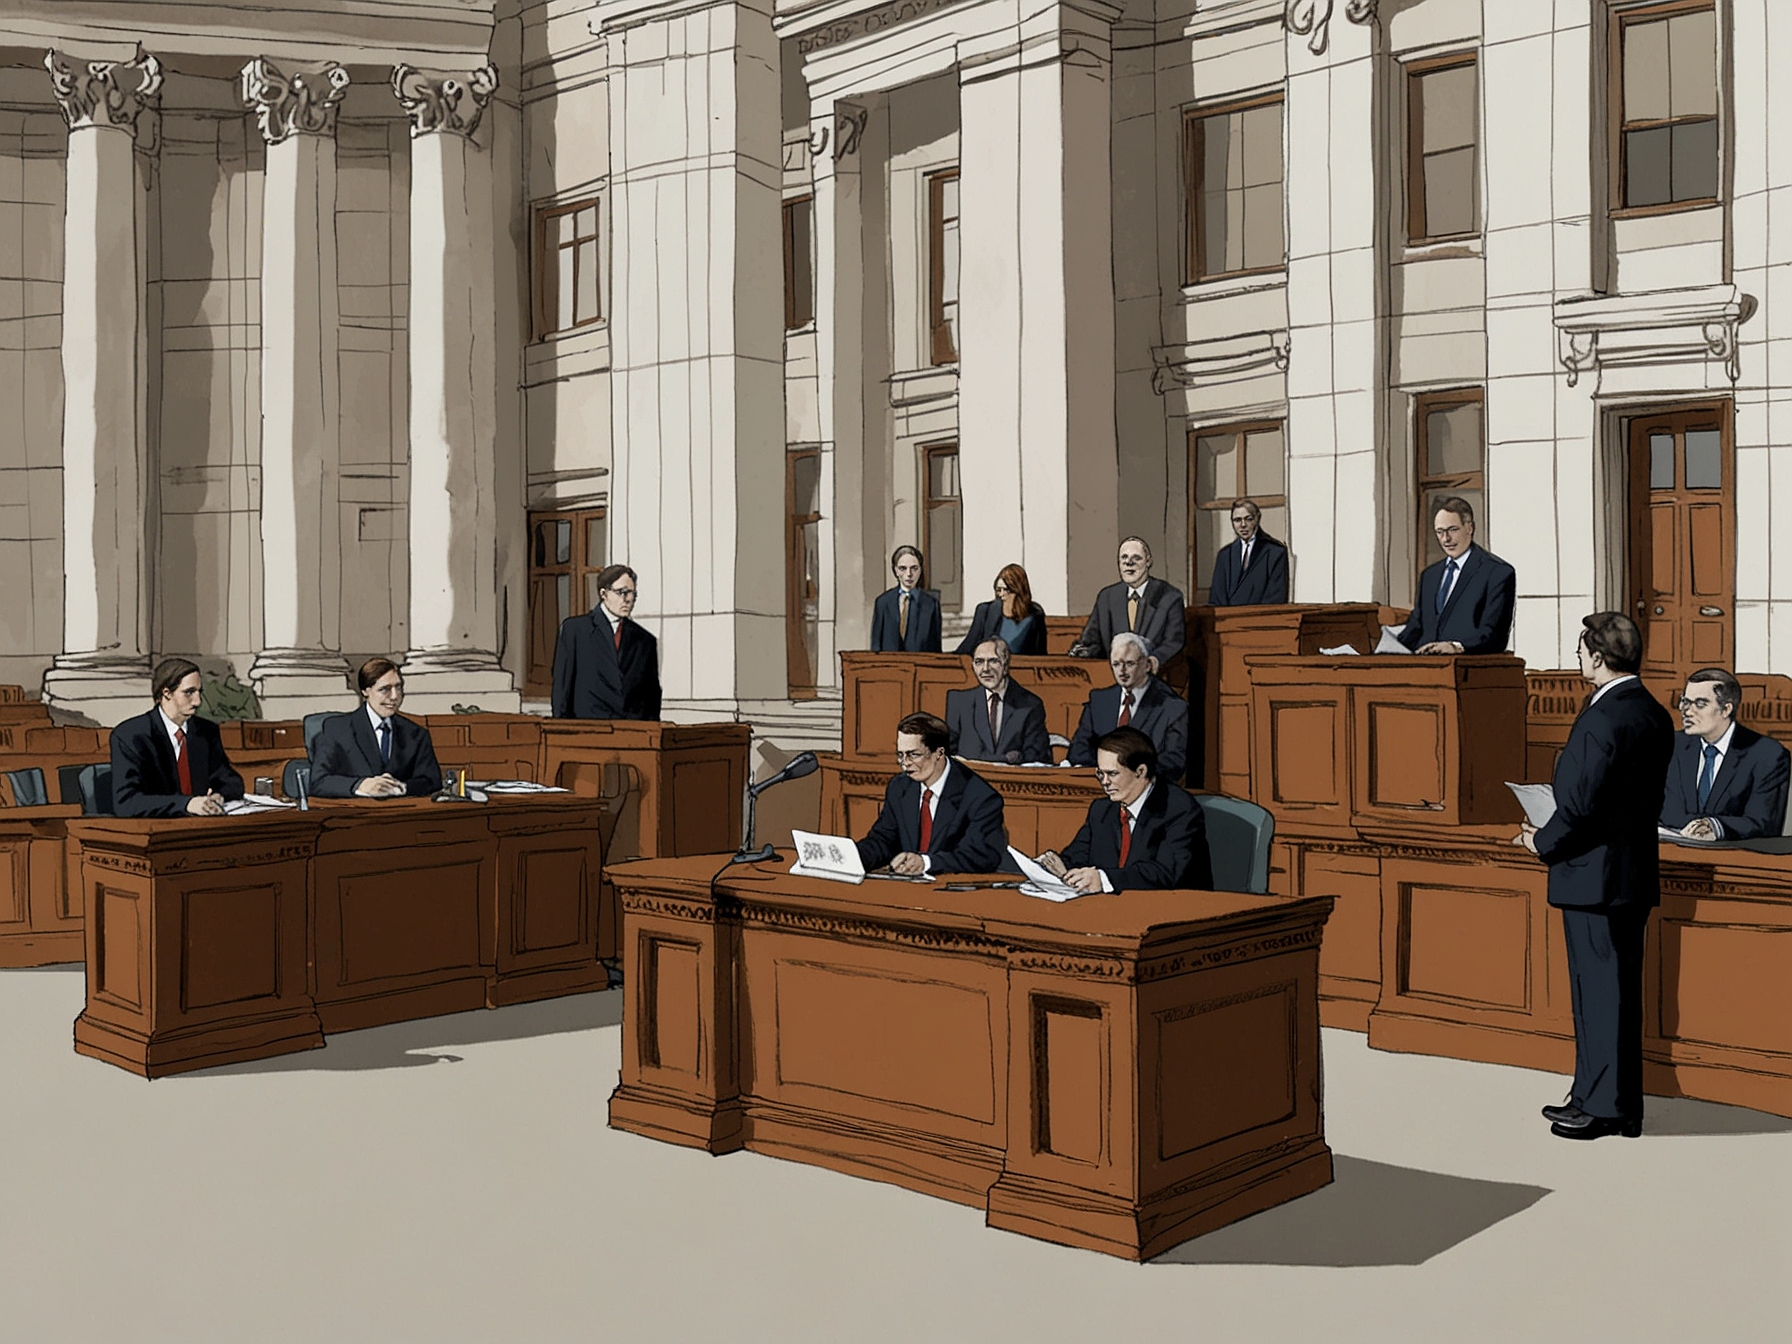 Artwork showing defense attorneys presenting cases in front of the Colorado State Supreme Court, leveraging new SCOTUS precedents to appeal past stalking convictions, emphasizing the shift in legal standards.